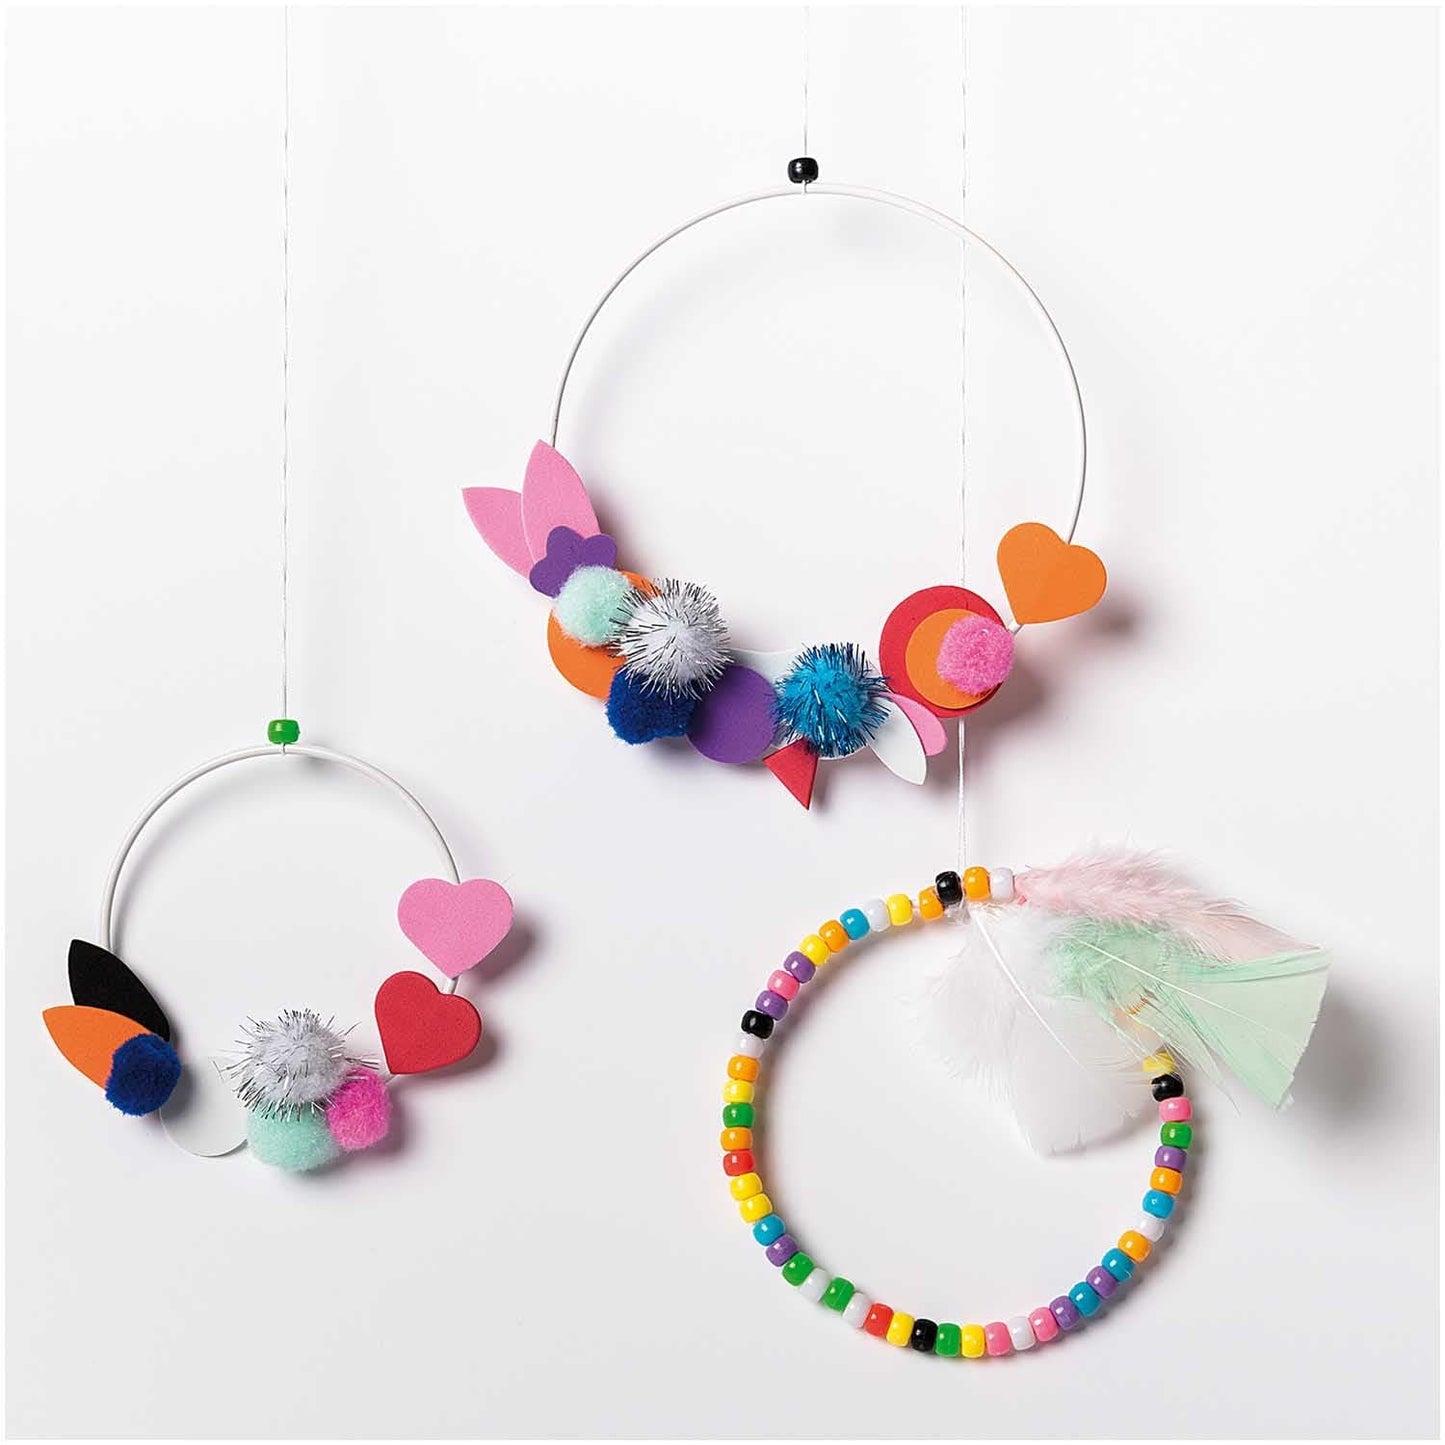 Kids Craft kit - Colourful | Stay at Home Kids Craft Set Rico Design GMBH & Co